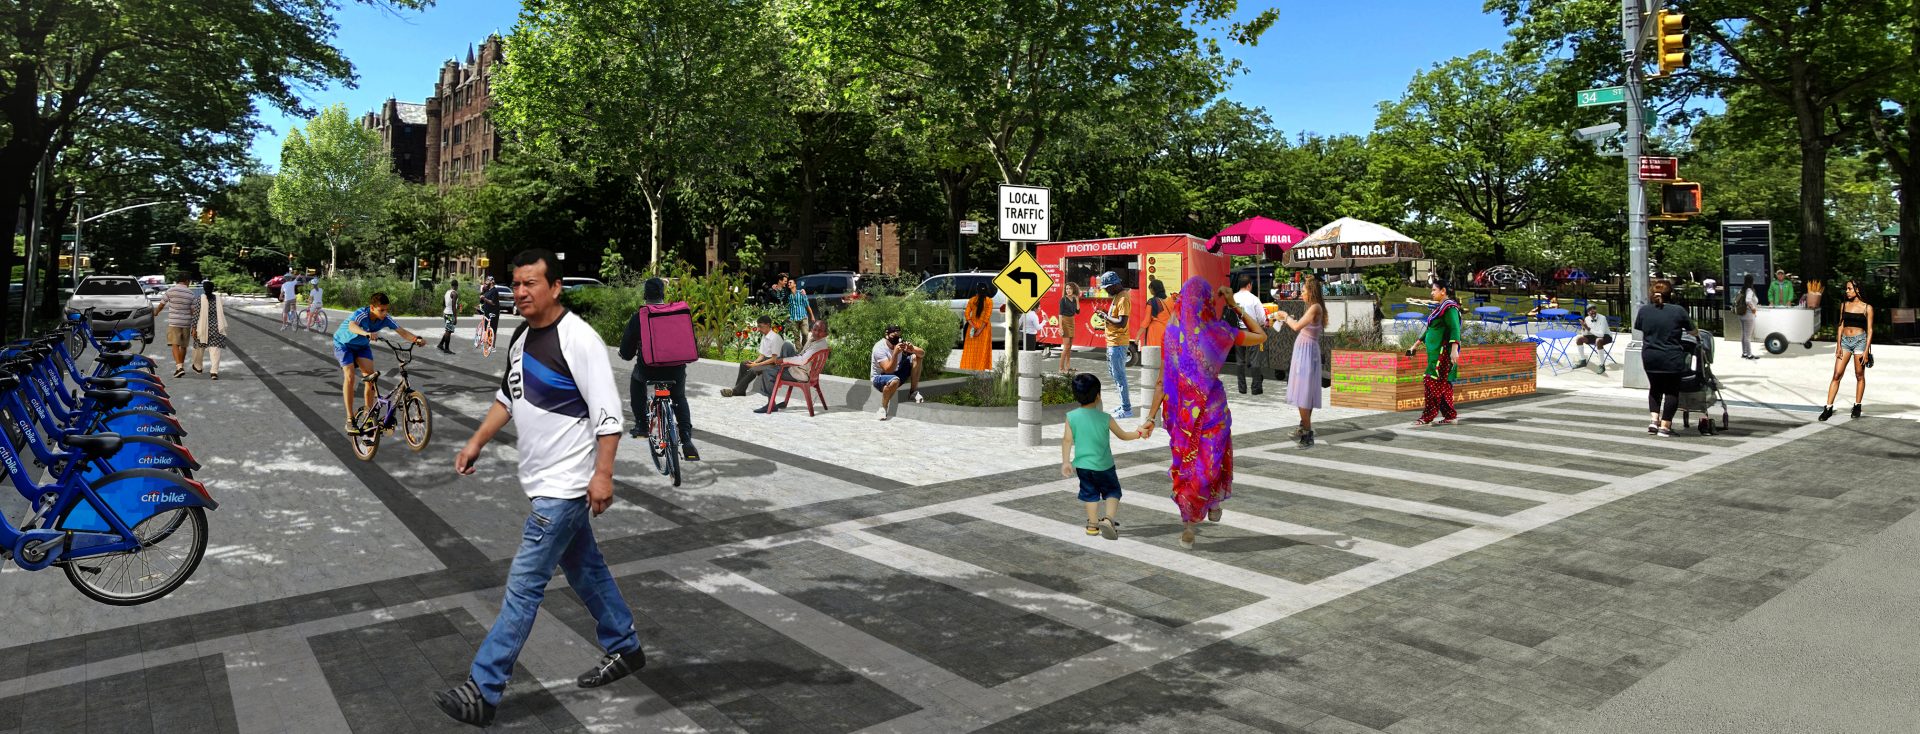 Webinar: Tactical Urbanism: Taking Short-Term Actions to Generate Long-term Change